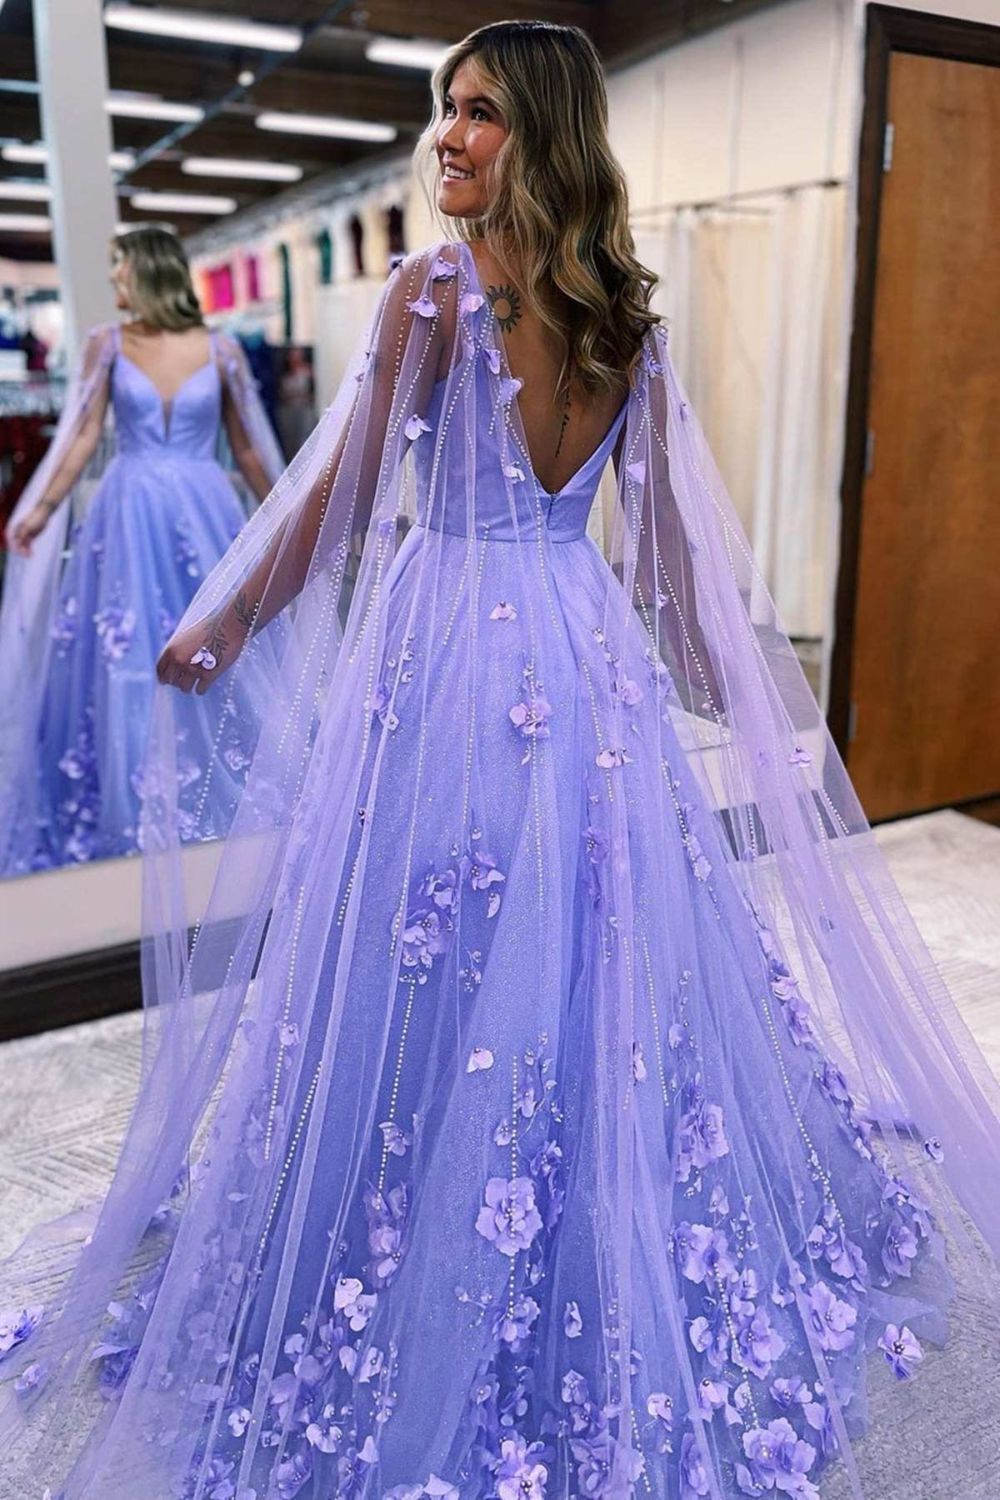 Dressime Ball Gown Tulle Spaghetti Straps 3D Flower Prom Dresses with Cape